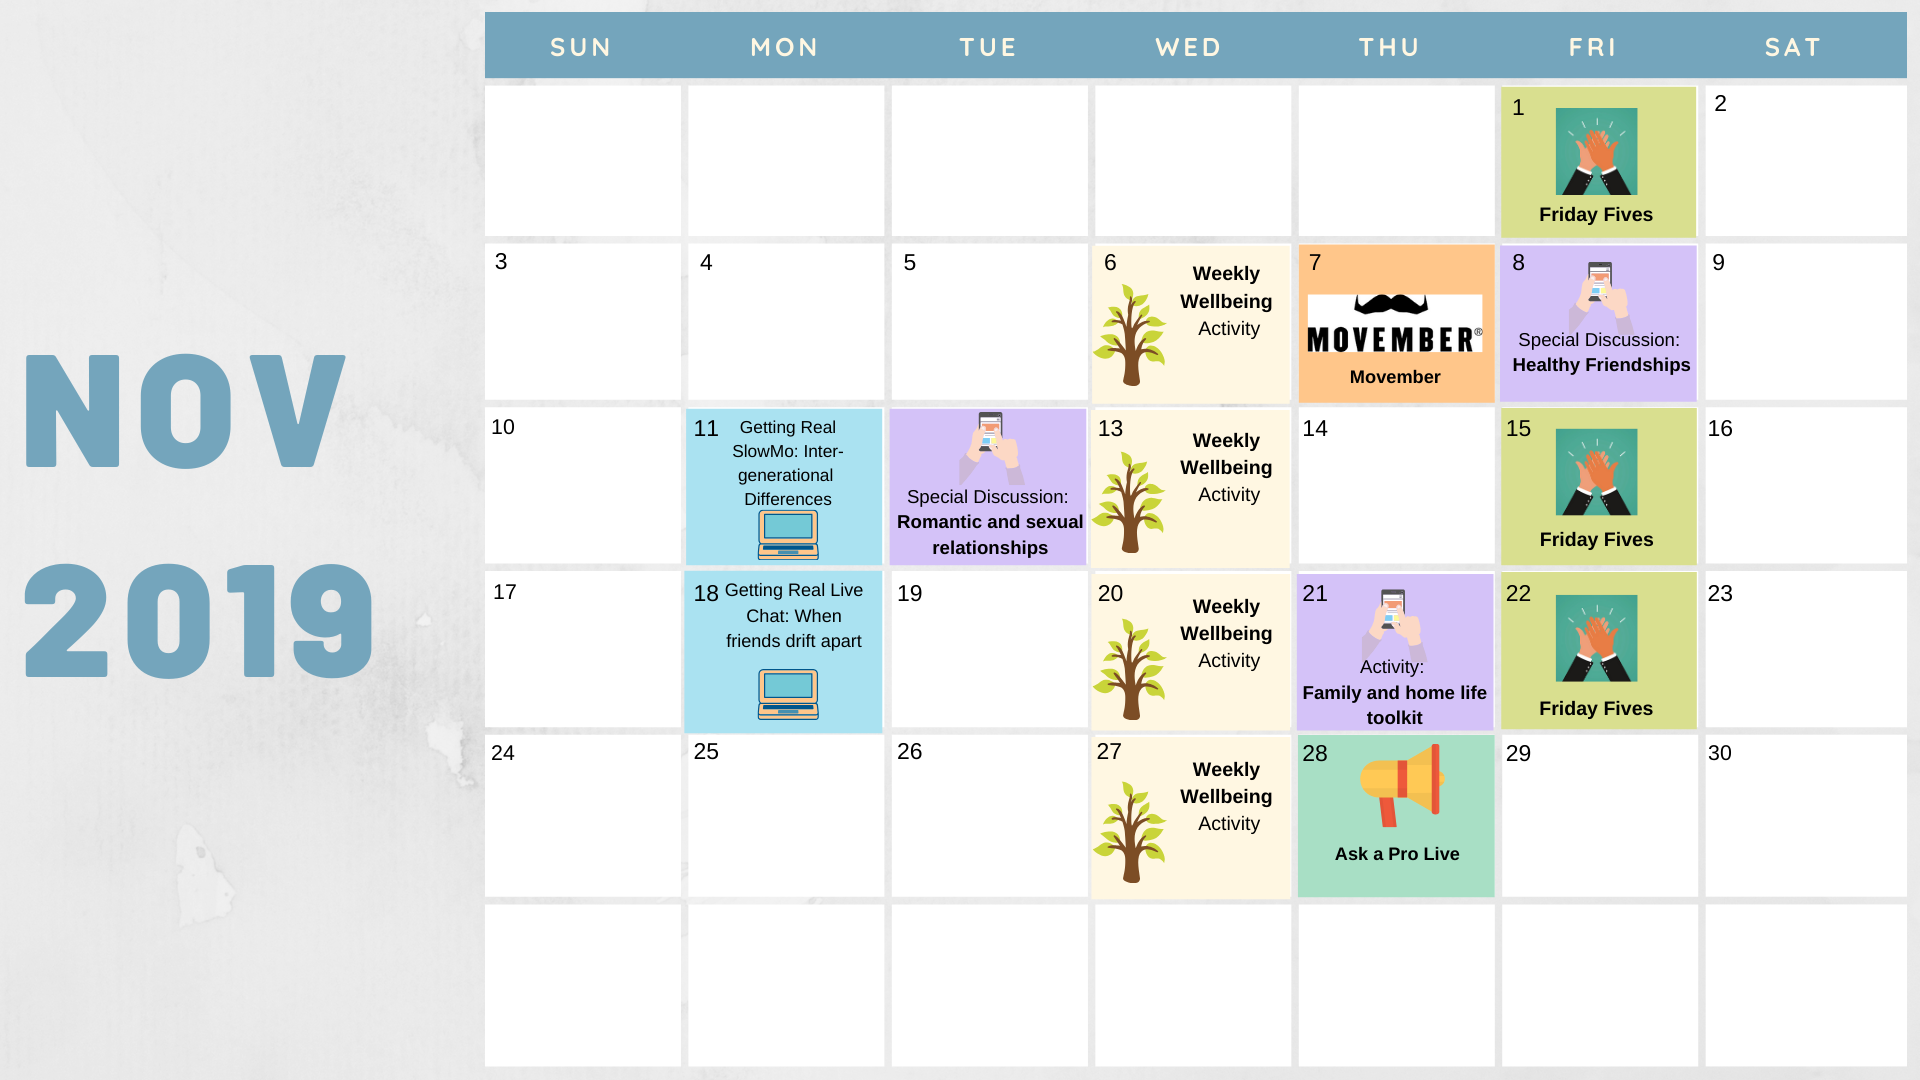 What's happening this month? Monthly calendar of R... ReachOut Forums